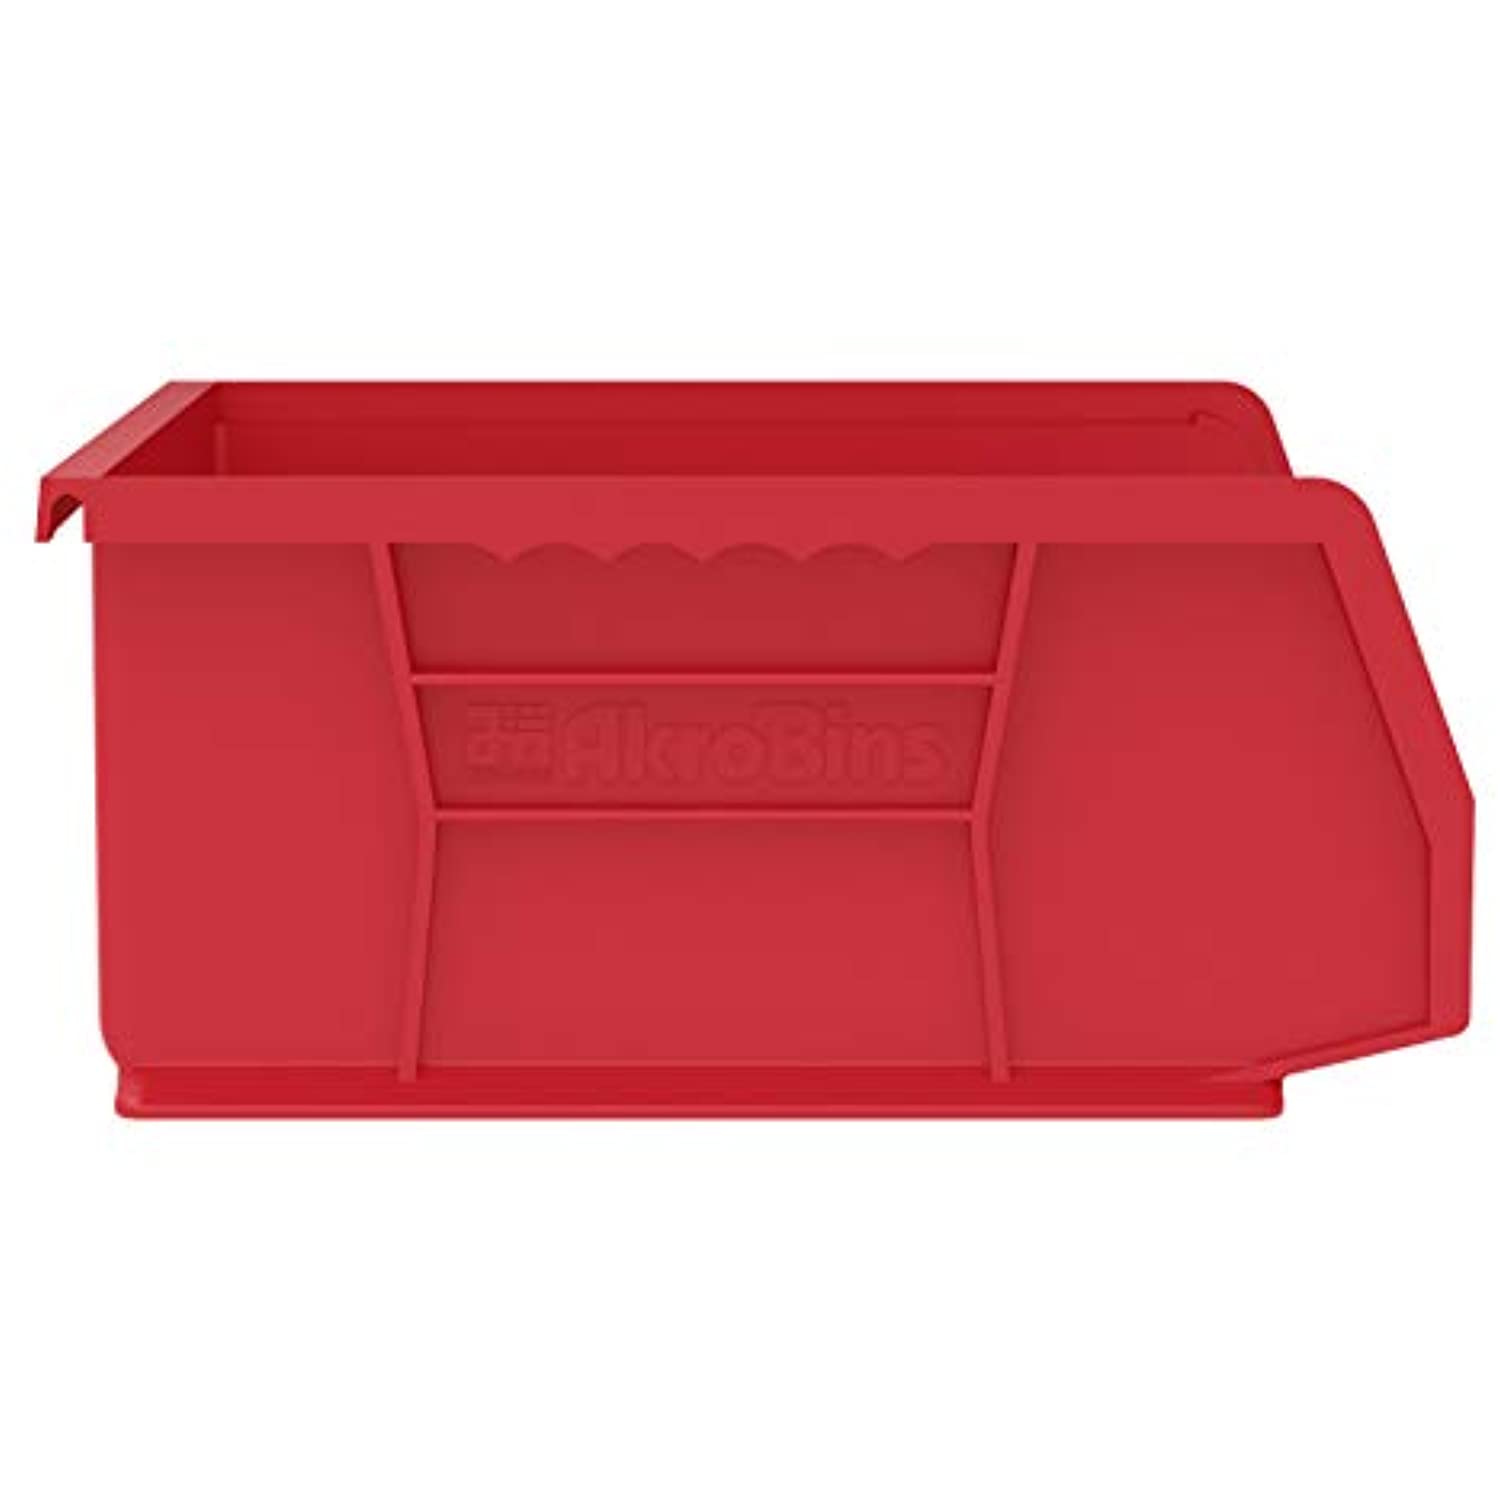 Akro-mils Hang and Stack Bin Red  Industrial Grade Polymer 30255RED - image 2 of 6